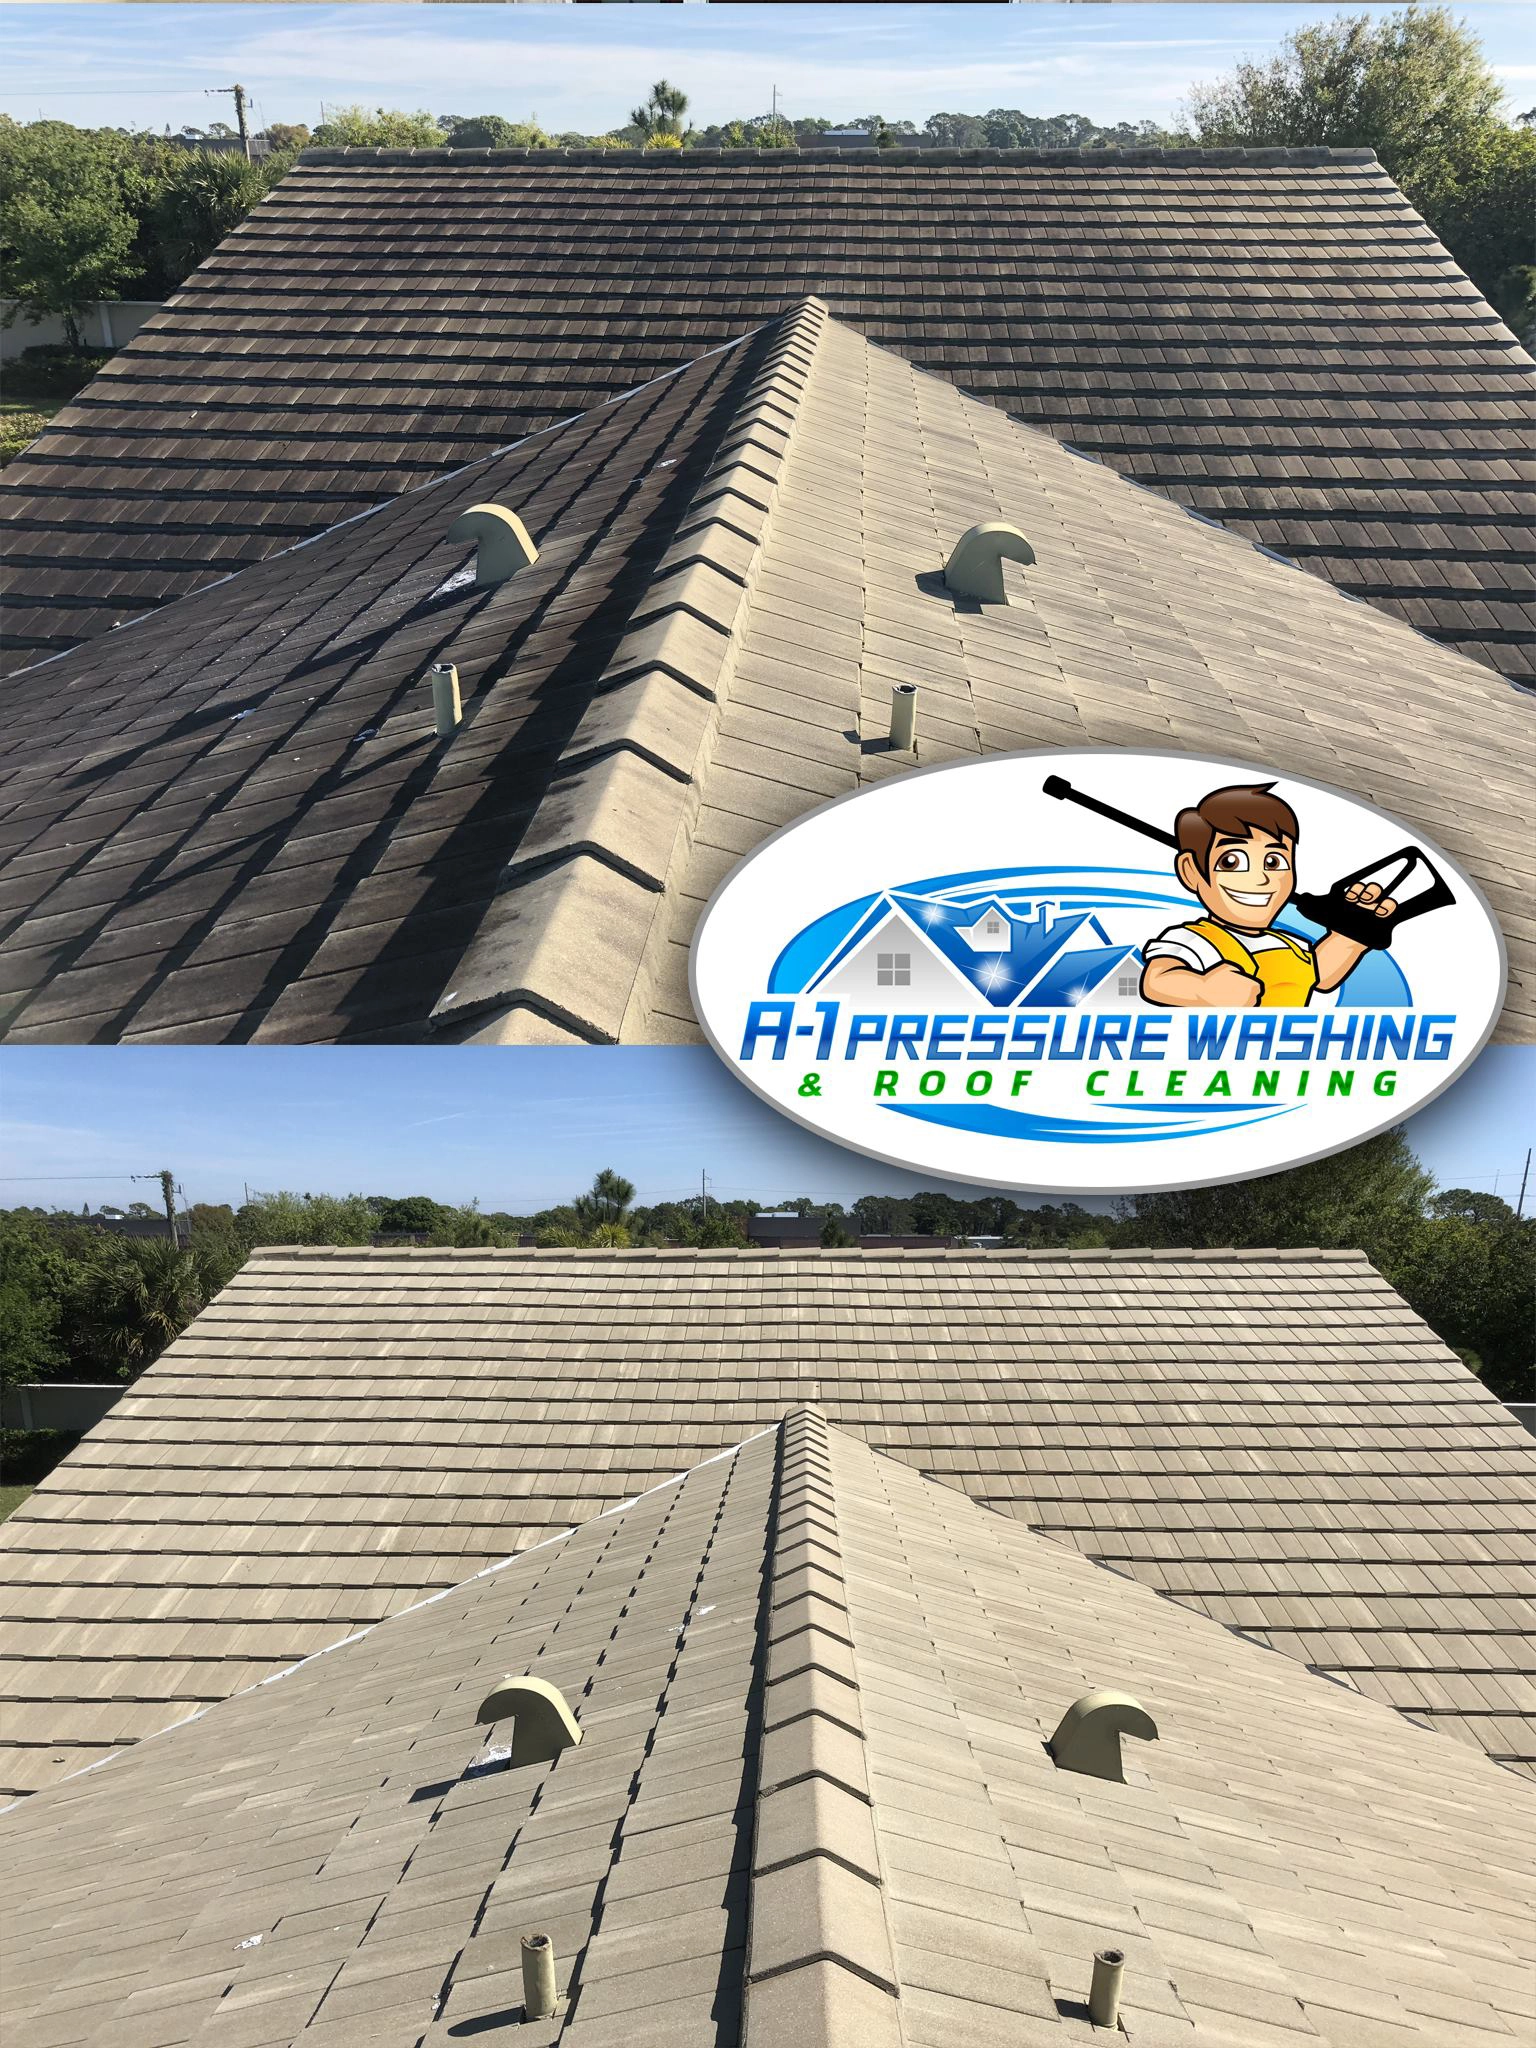 Soft Wash Tile Roof Cleaning | A-1 Pressure Washing & Roof Cleaning | 941-815-8454 